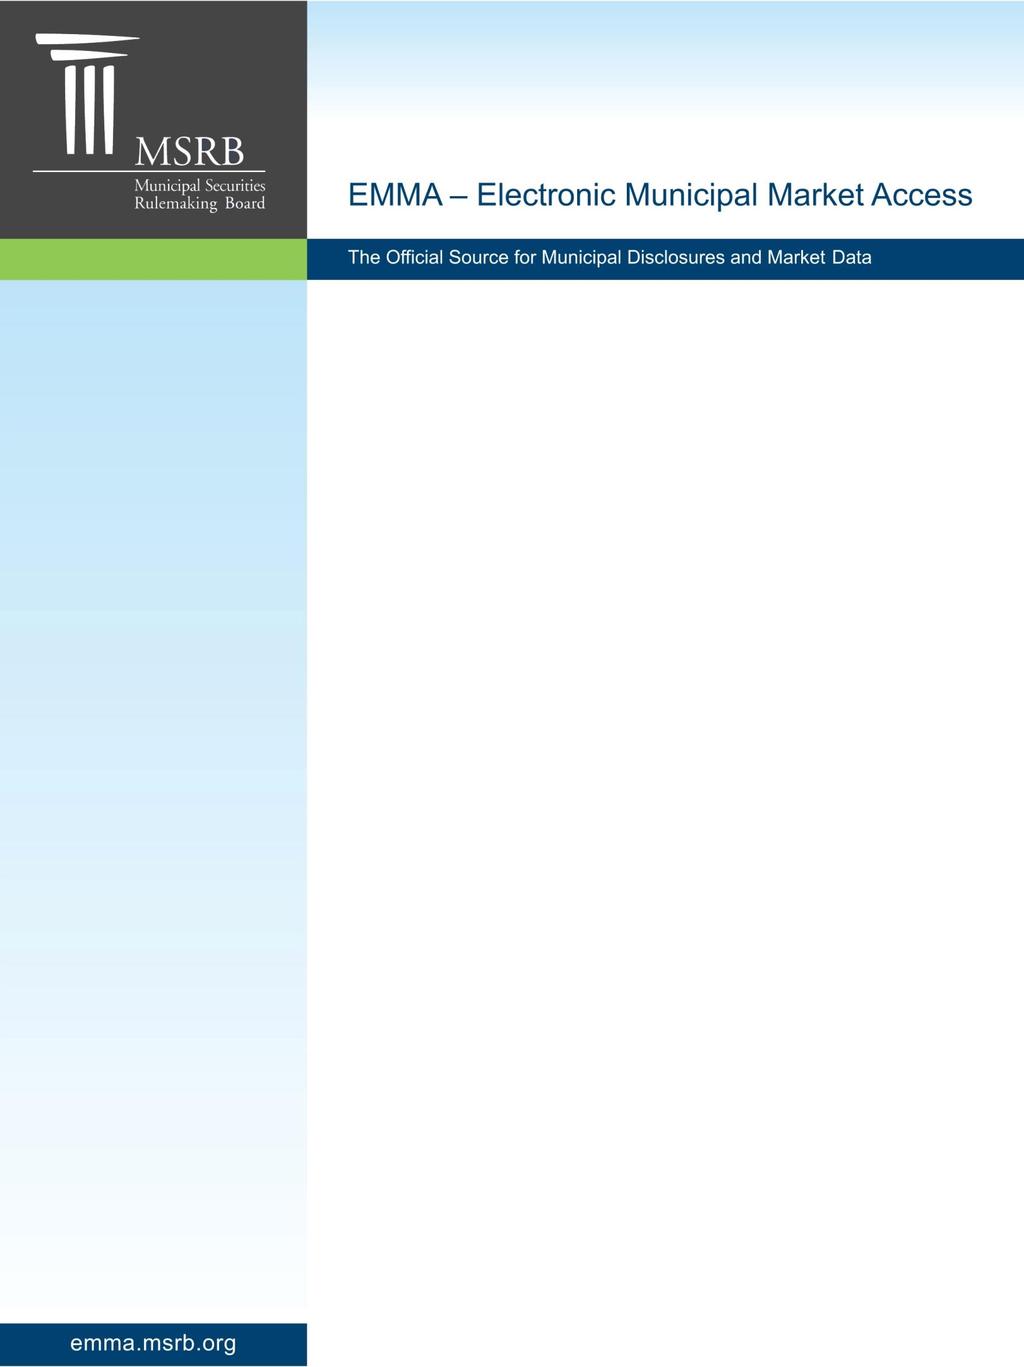 The Official Source for Municipal Disclosures and Market Data EMMA Dataport